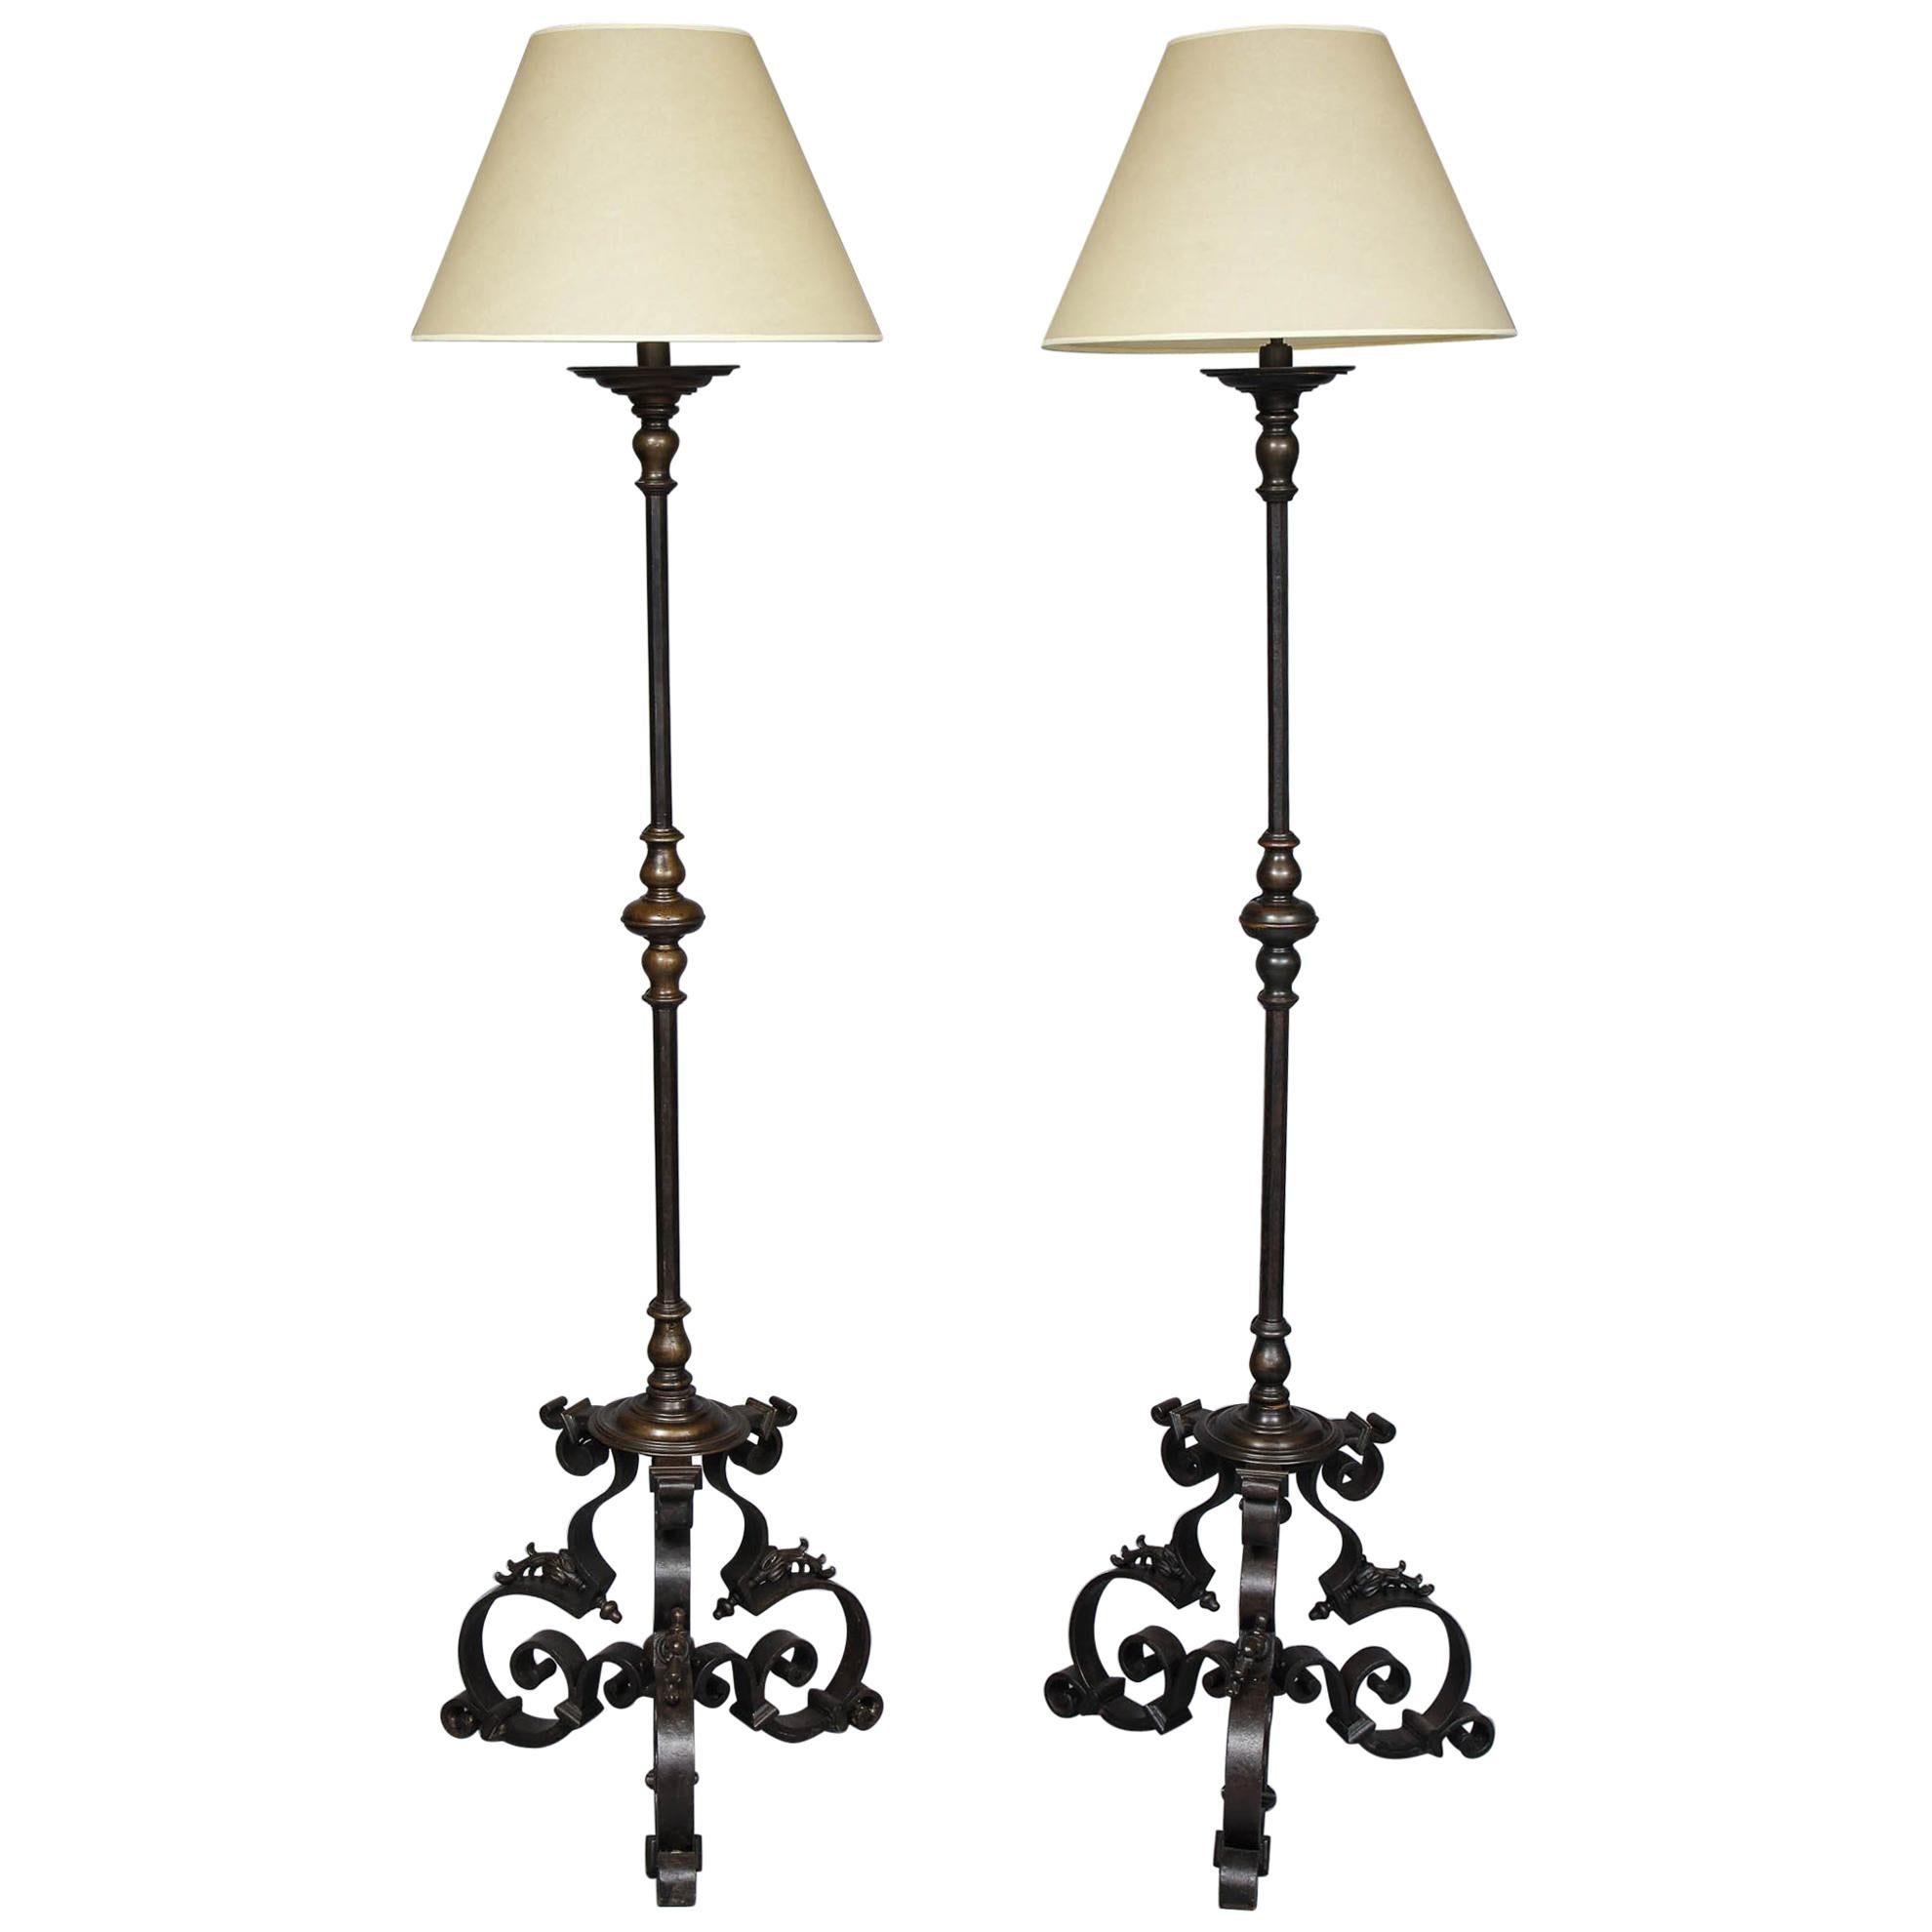 Massive Pair of Wrought Iron and Bronze Floor Lamps